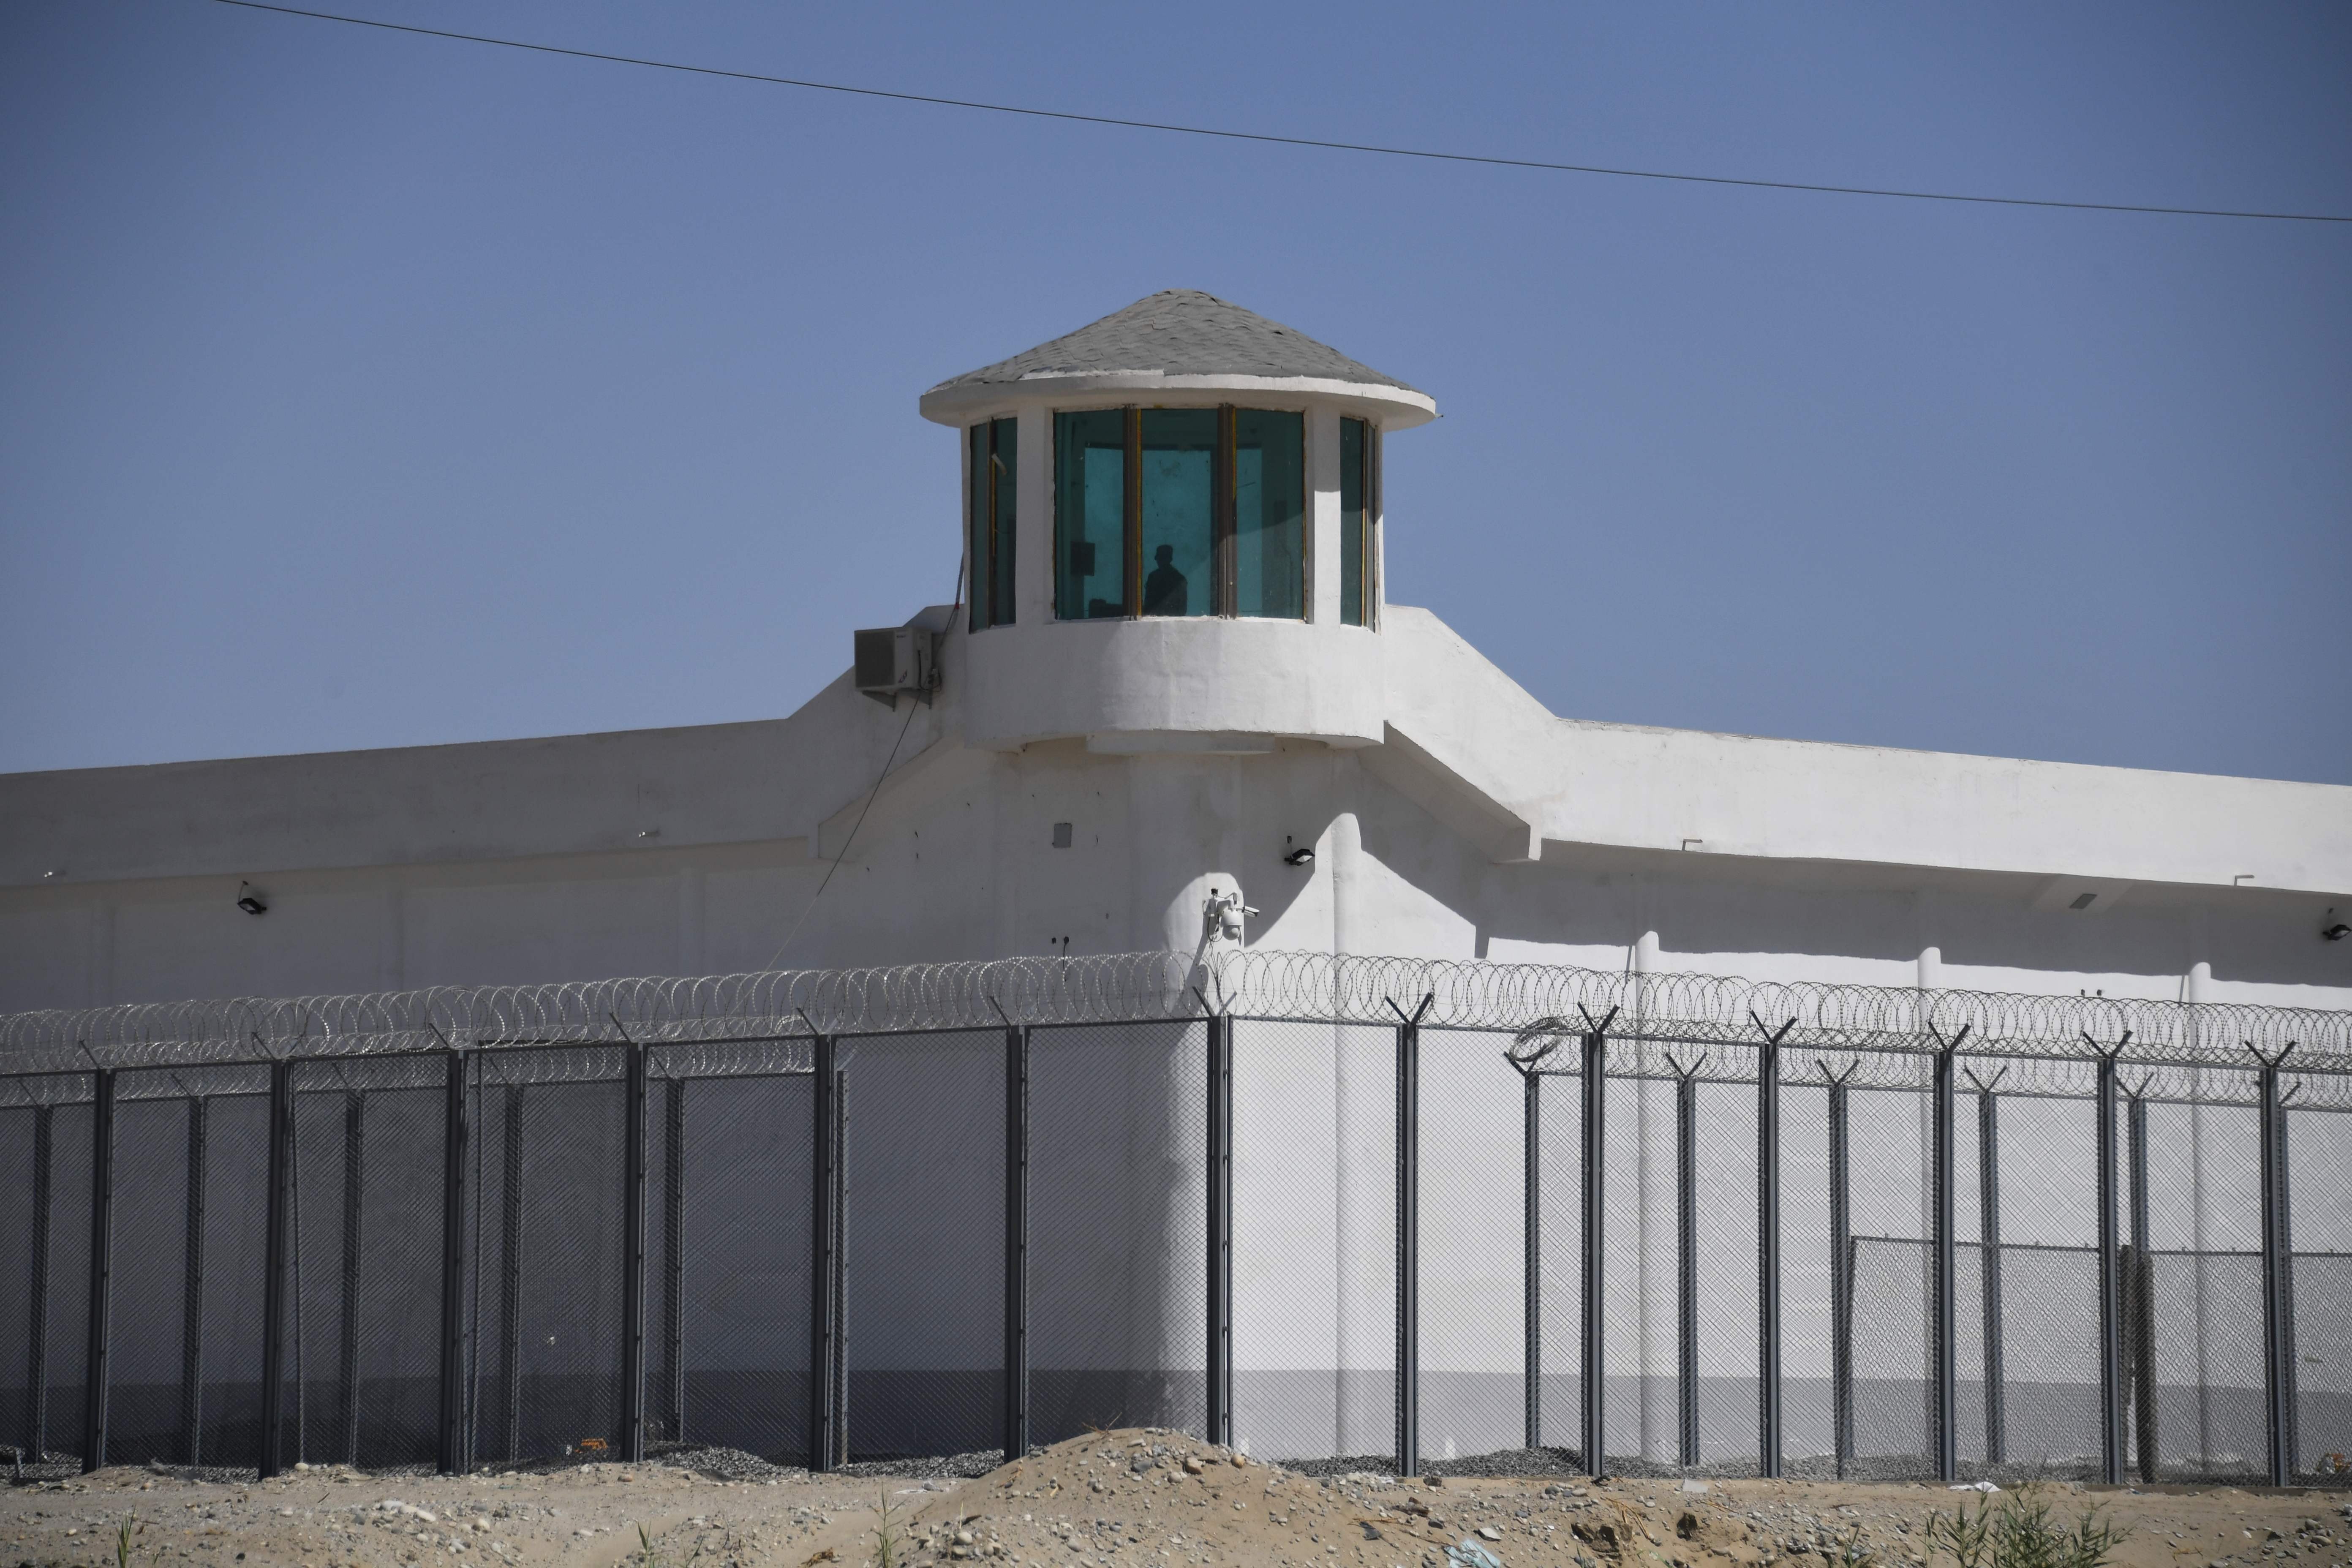 A high-security facility near what is believed to be a re-education camp where mostly Muslim minorities are detained, on the outskirts of Hotan in Xinjiang. Photo: AFP